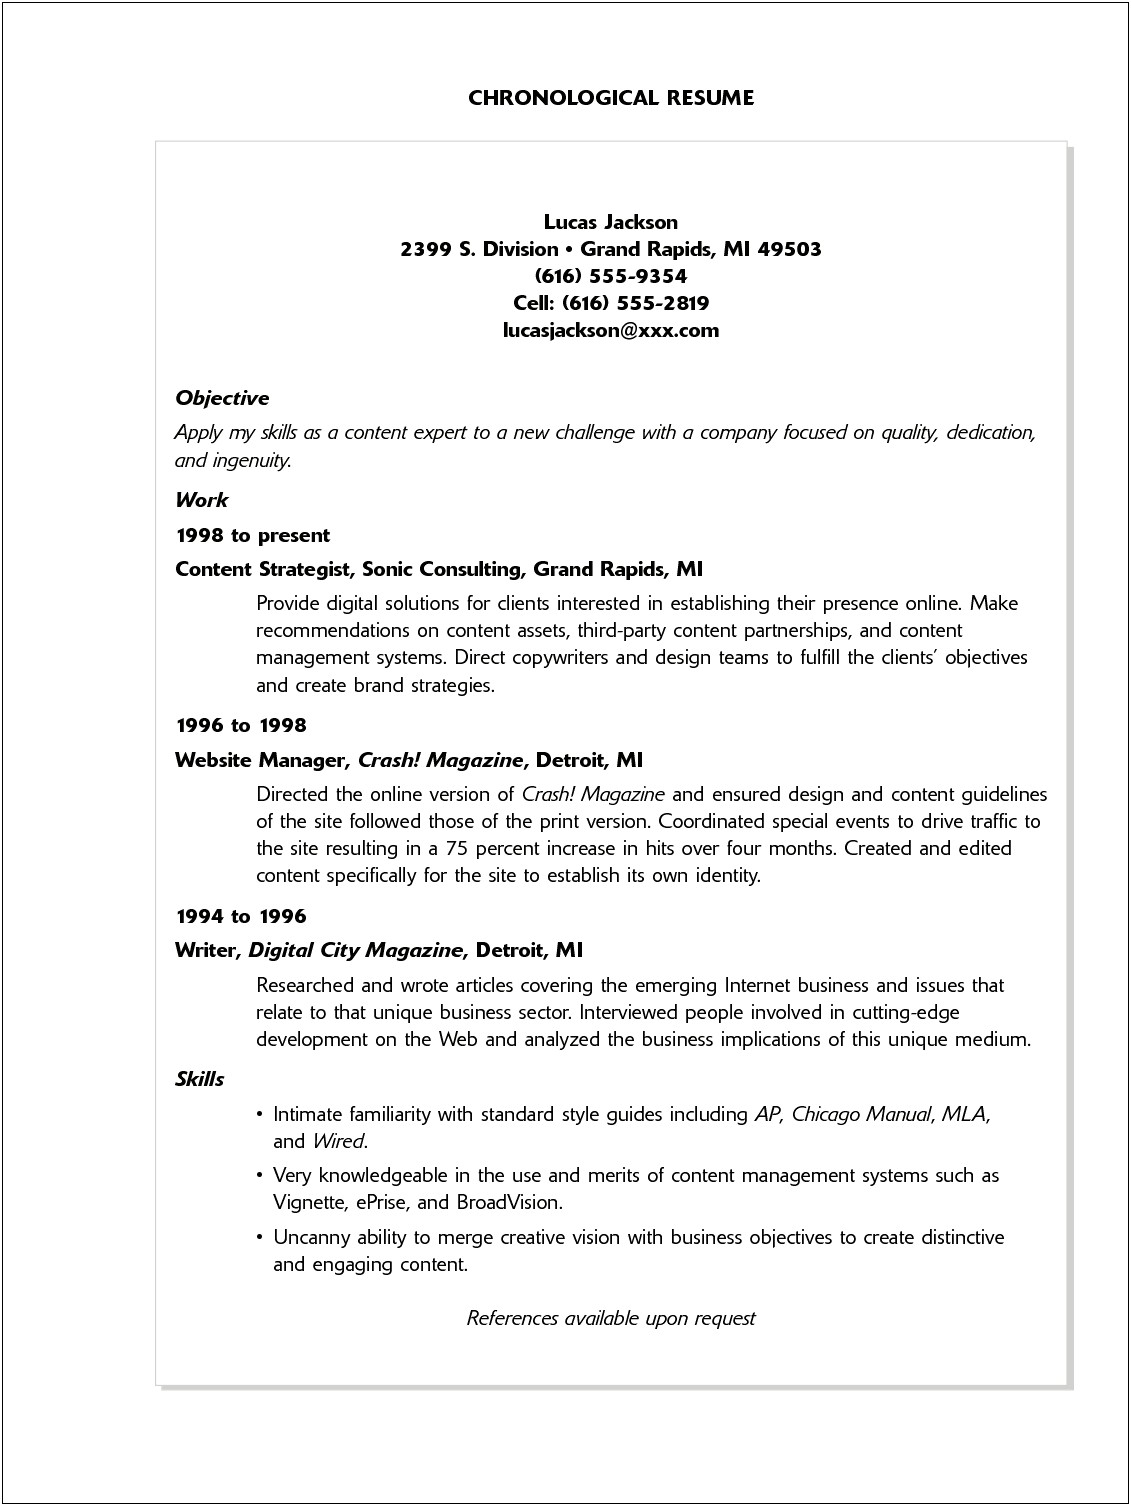 Computer Science Student Resume Summary Examples